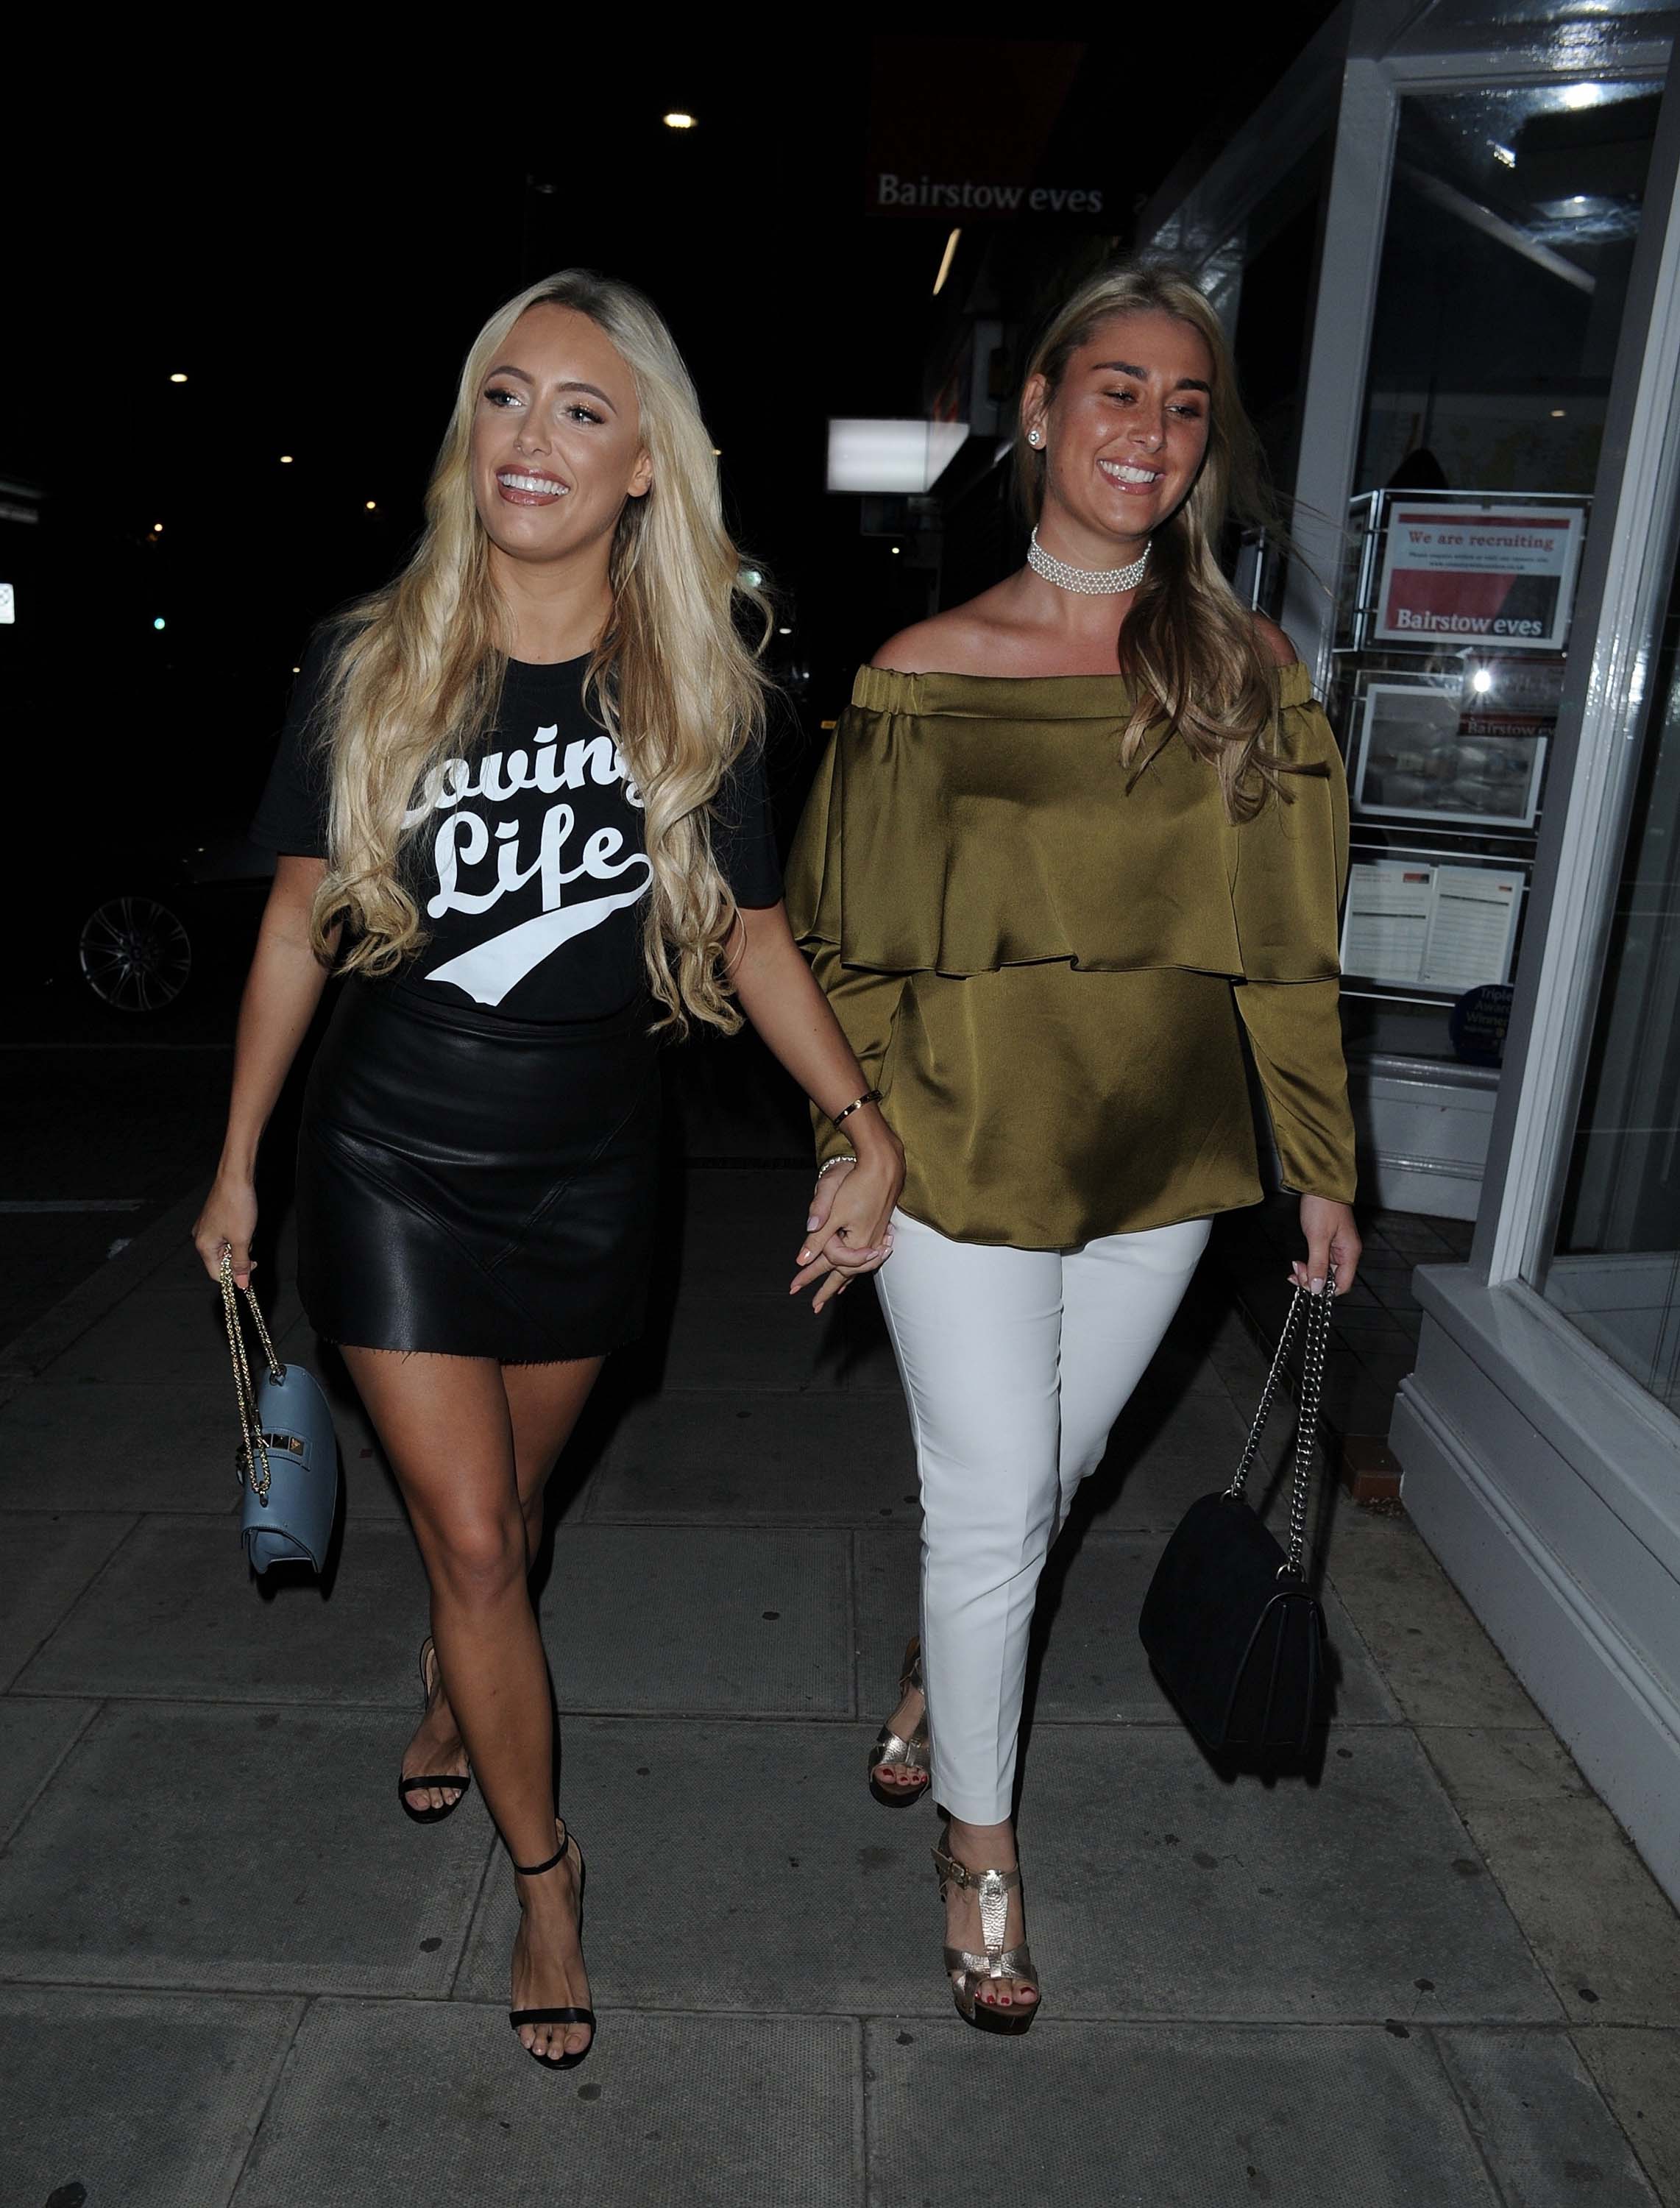 Amber Turner heads out for dinner in Essex